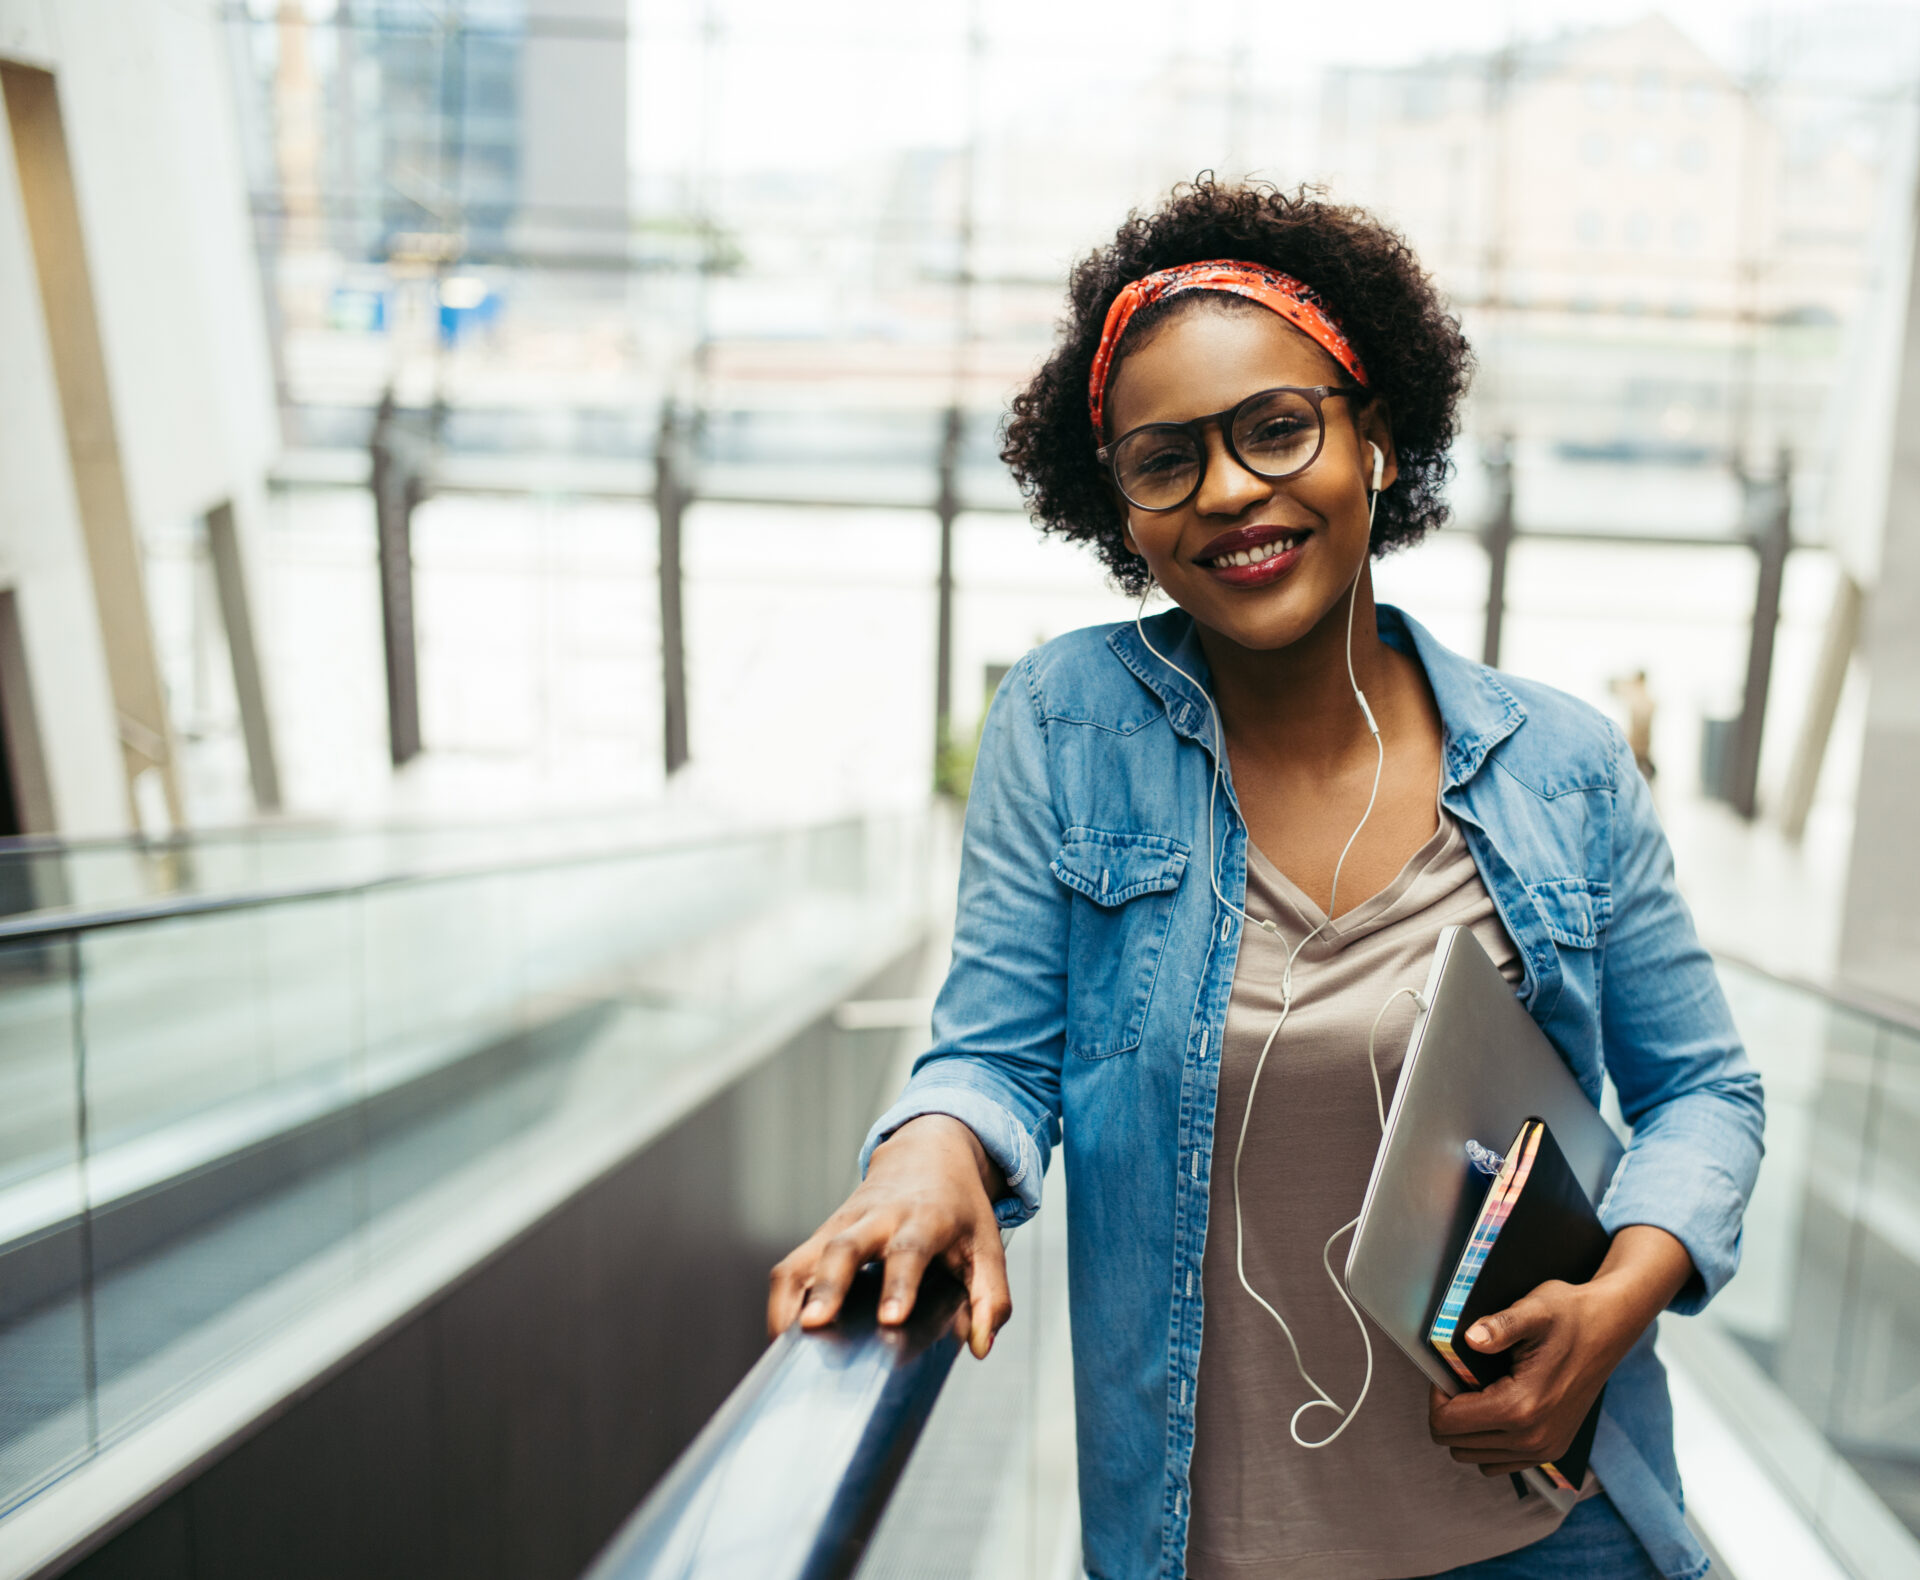 Young African female entrepreneur smiling confidently while riding up an escalator in the lobby of a modern office building carrying a laptop and wearing earphones